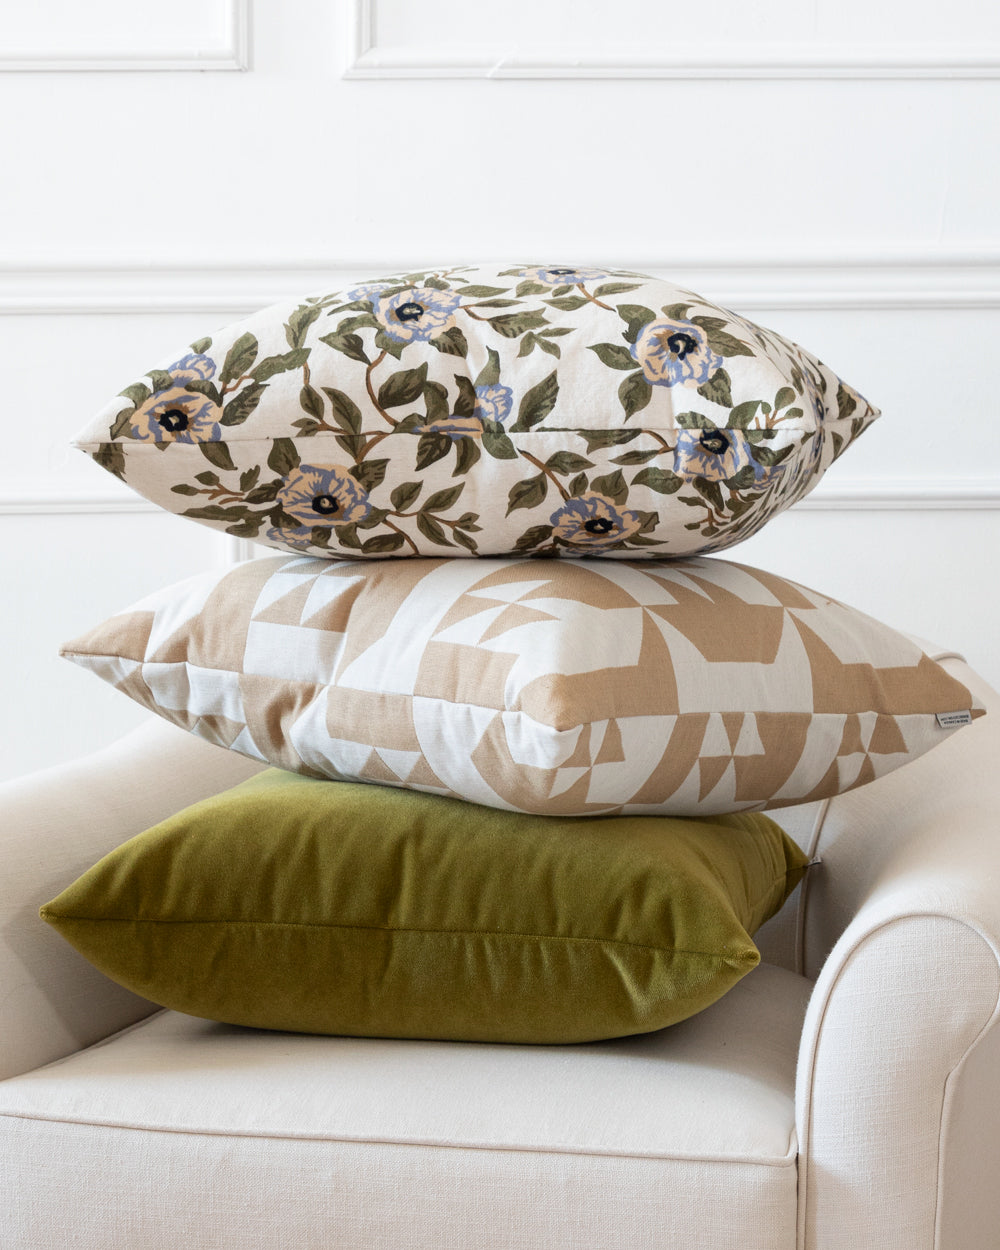 Square cotton floral pillow on top of stack of pillows sitting on a white arm chair